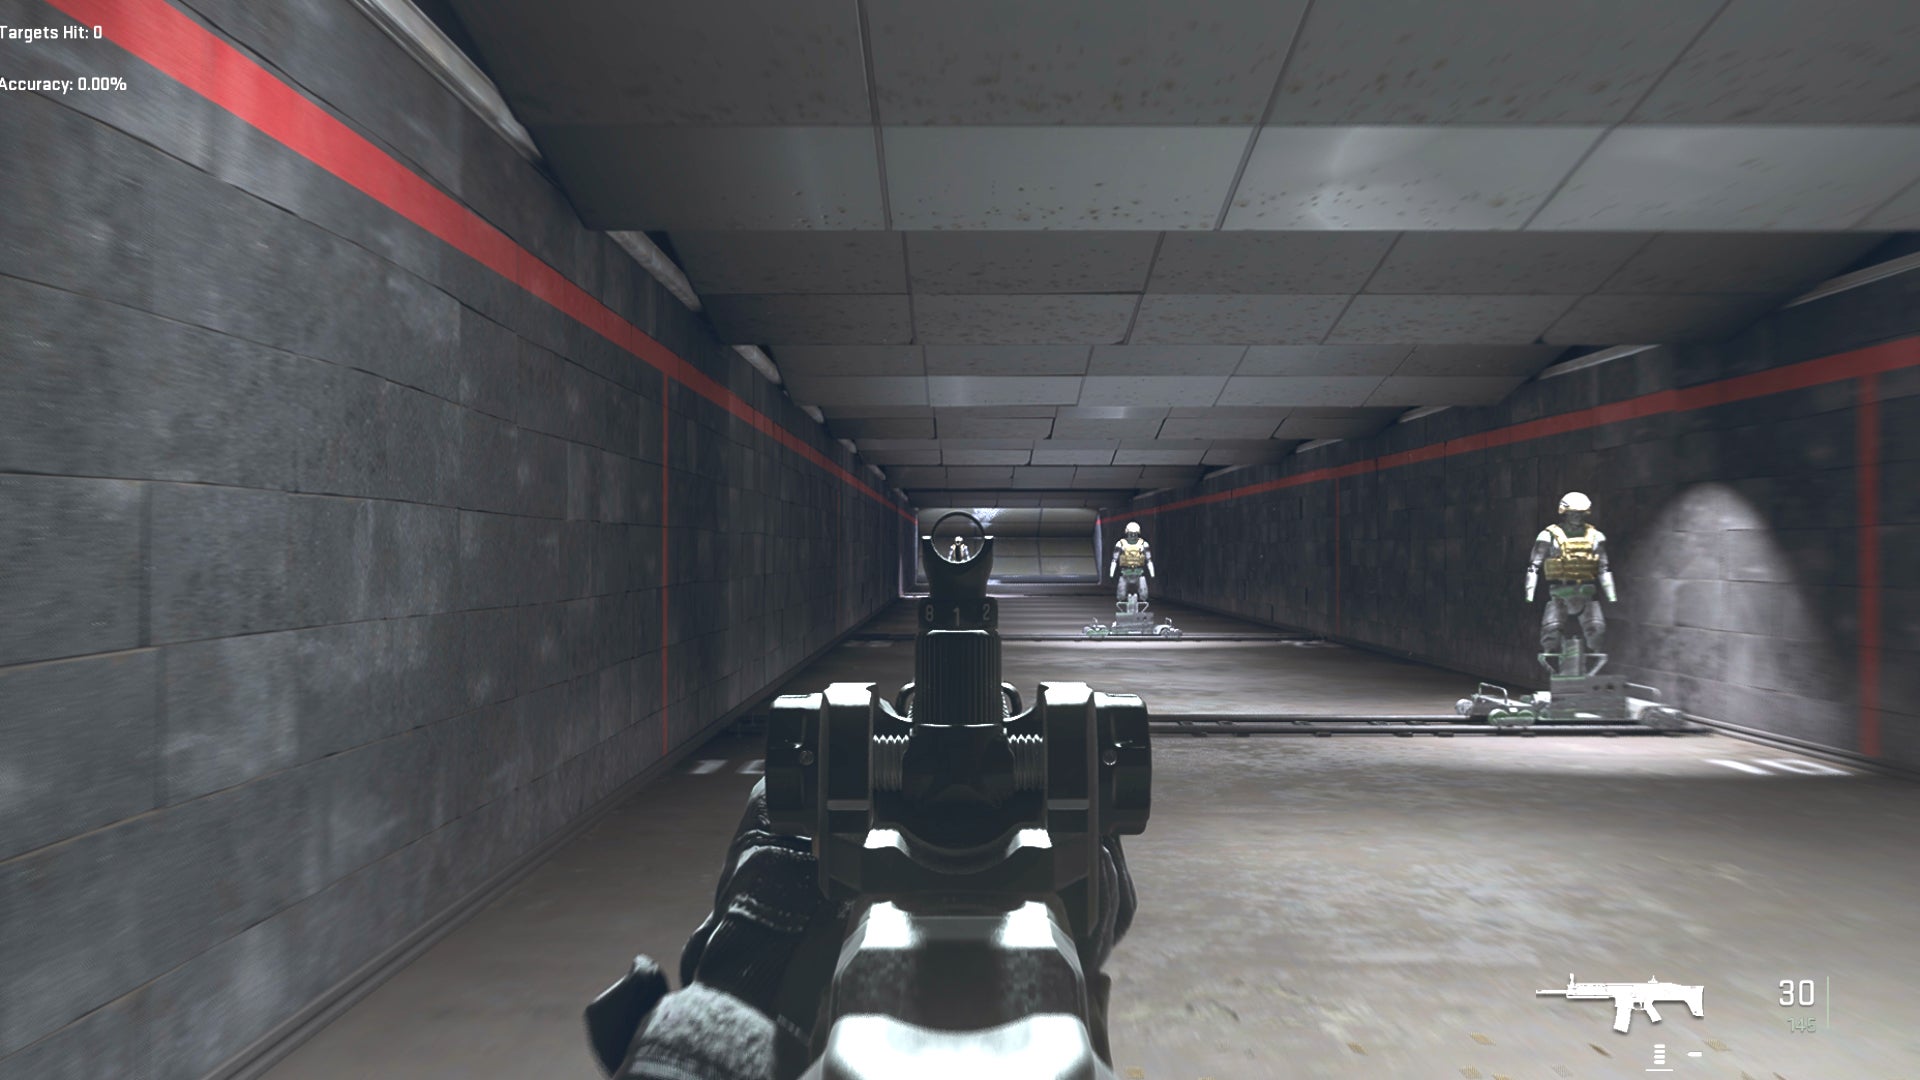 The player in Warzone 2.0 aims at a training dummy with the TAQ-56 ironsights.